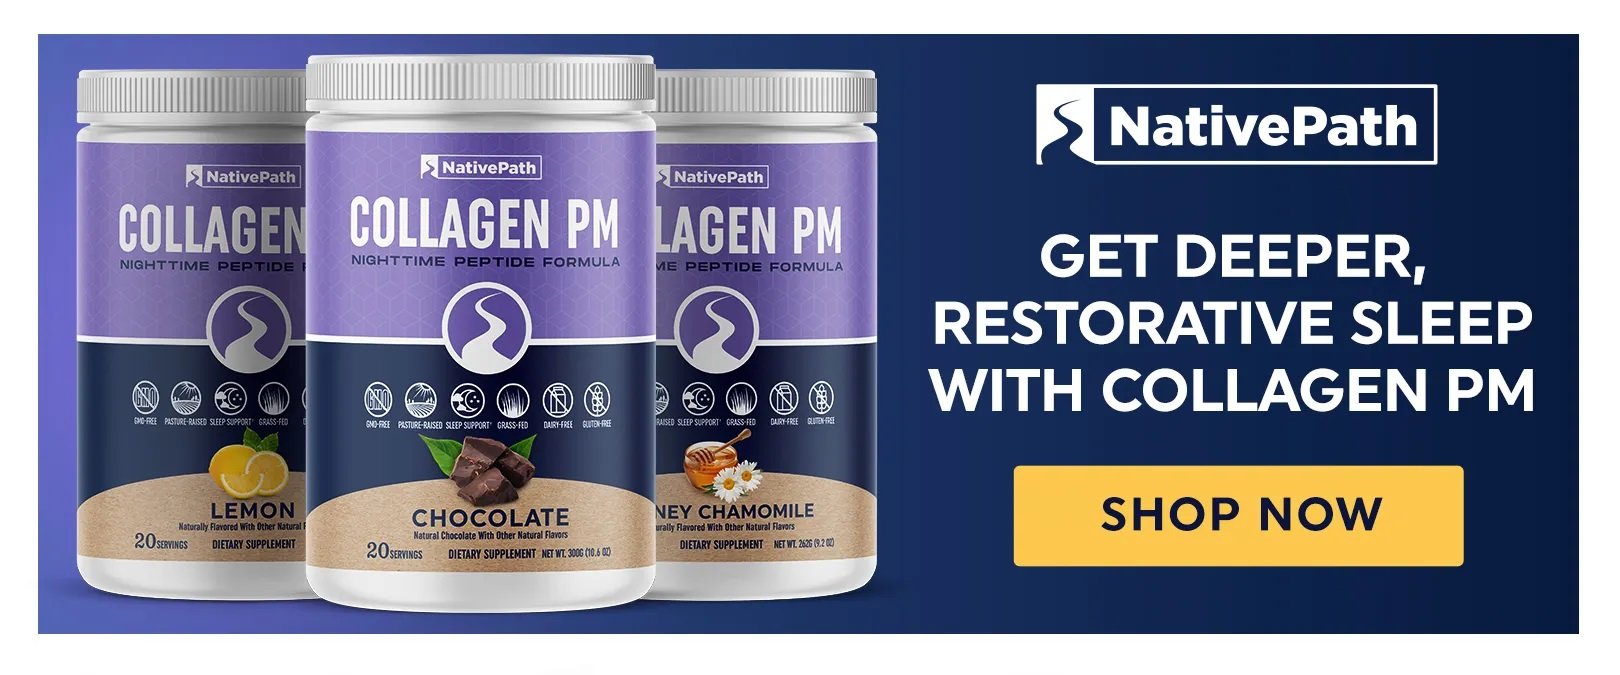 Non-Negotiable #2: Drink Collagen PM